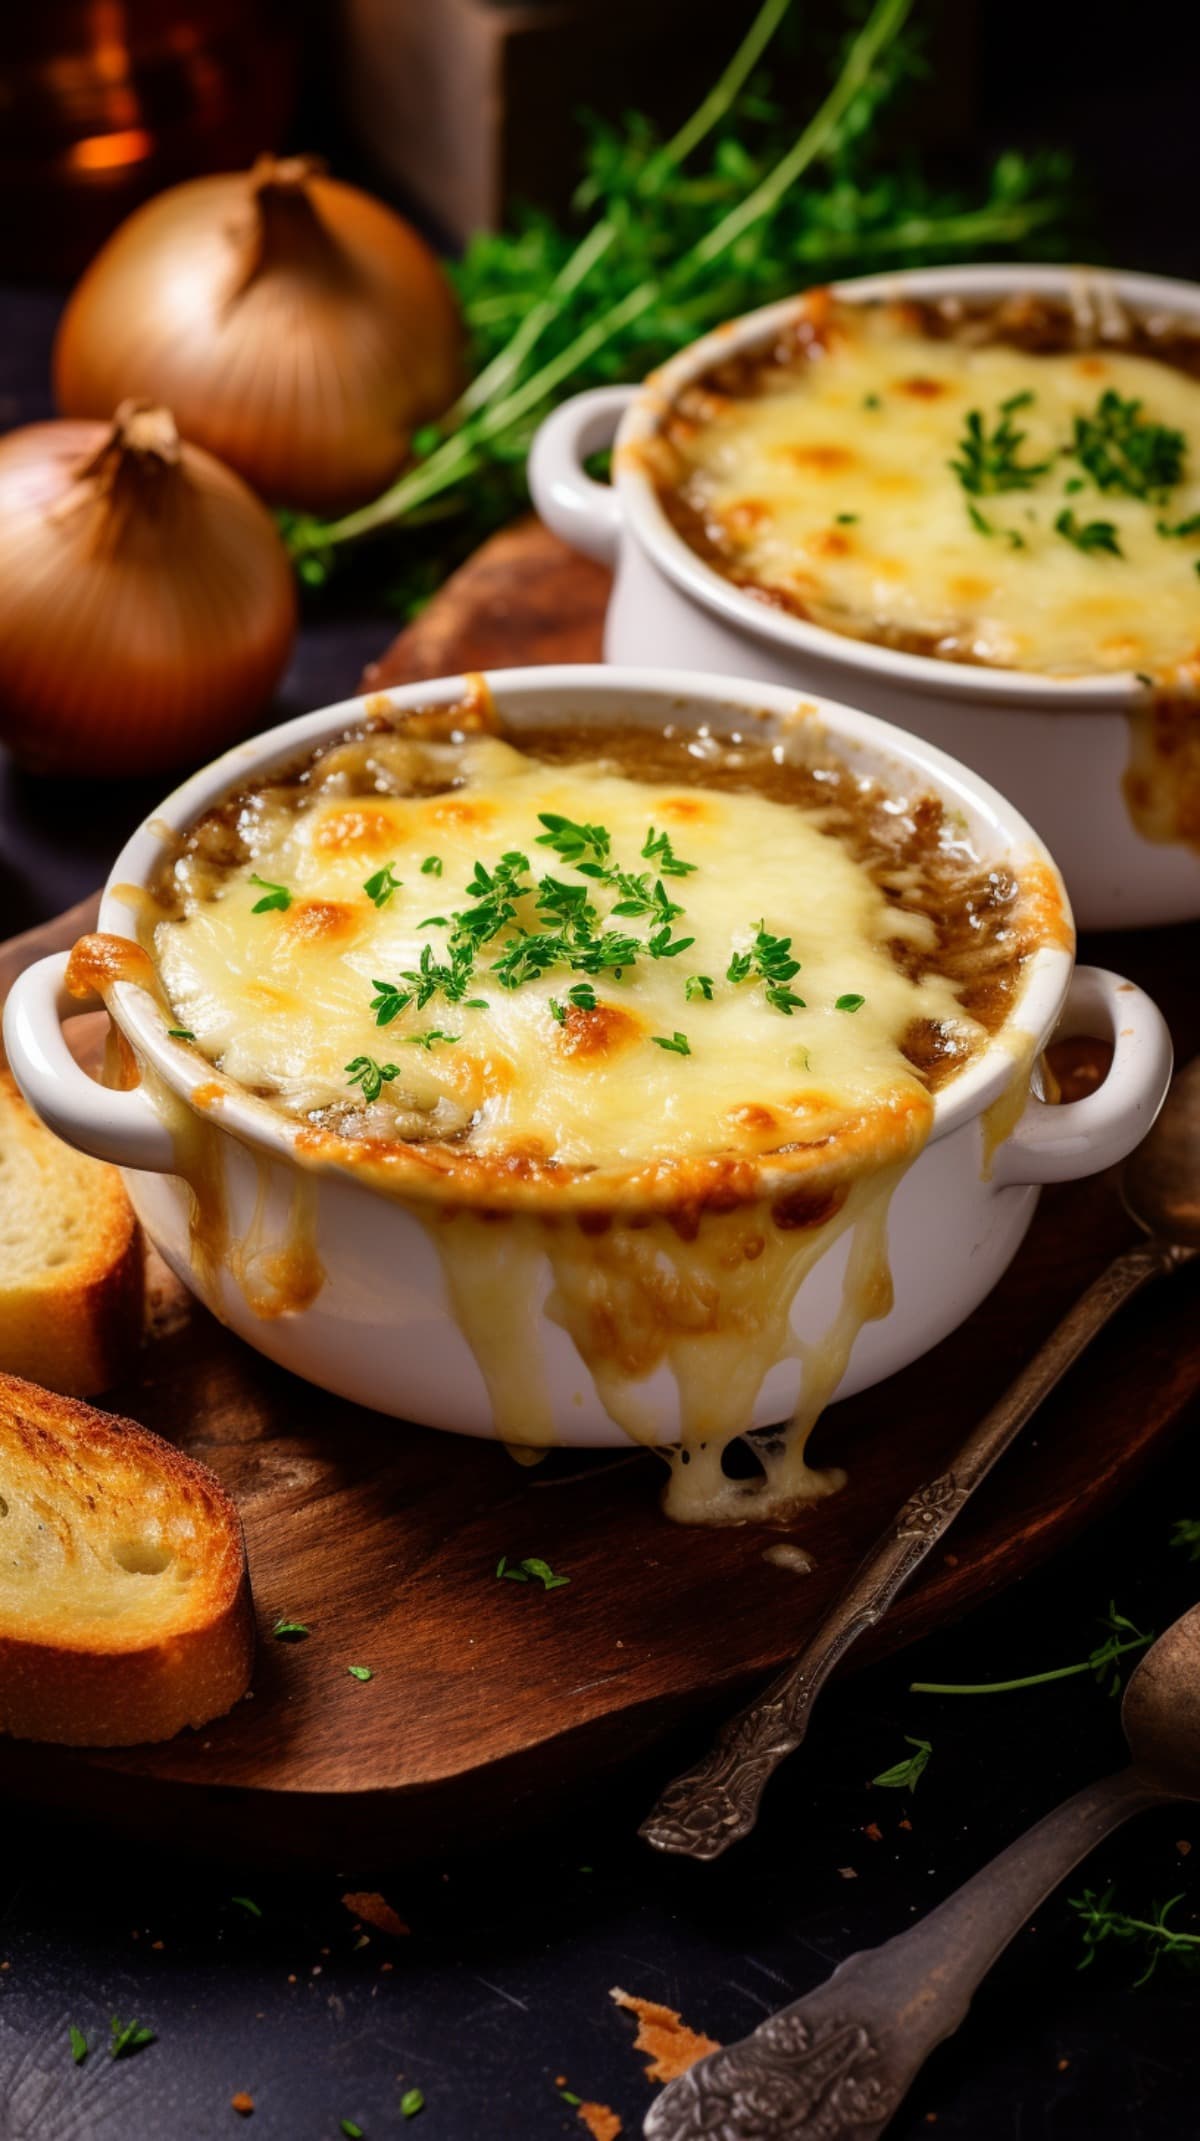 Portion of French Onion Soup